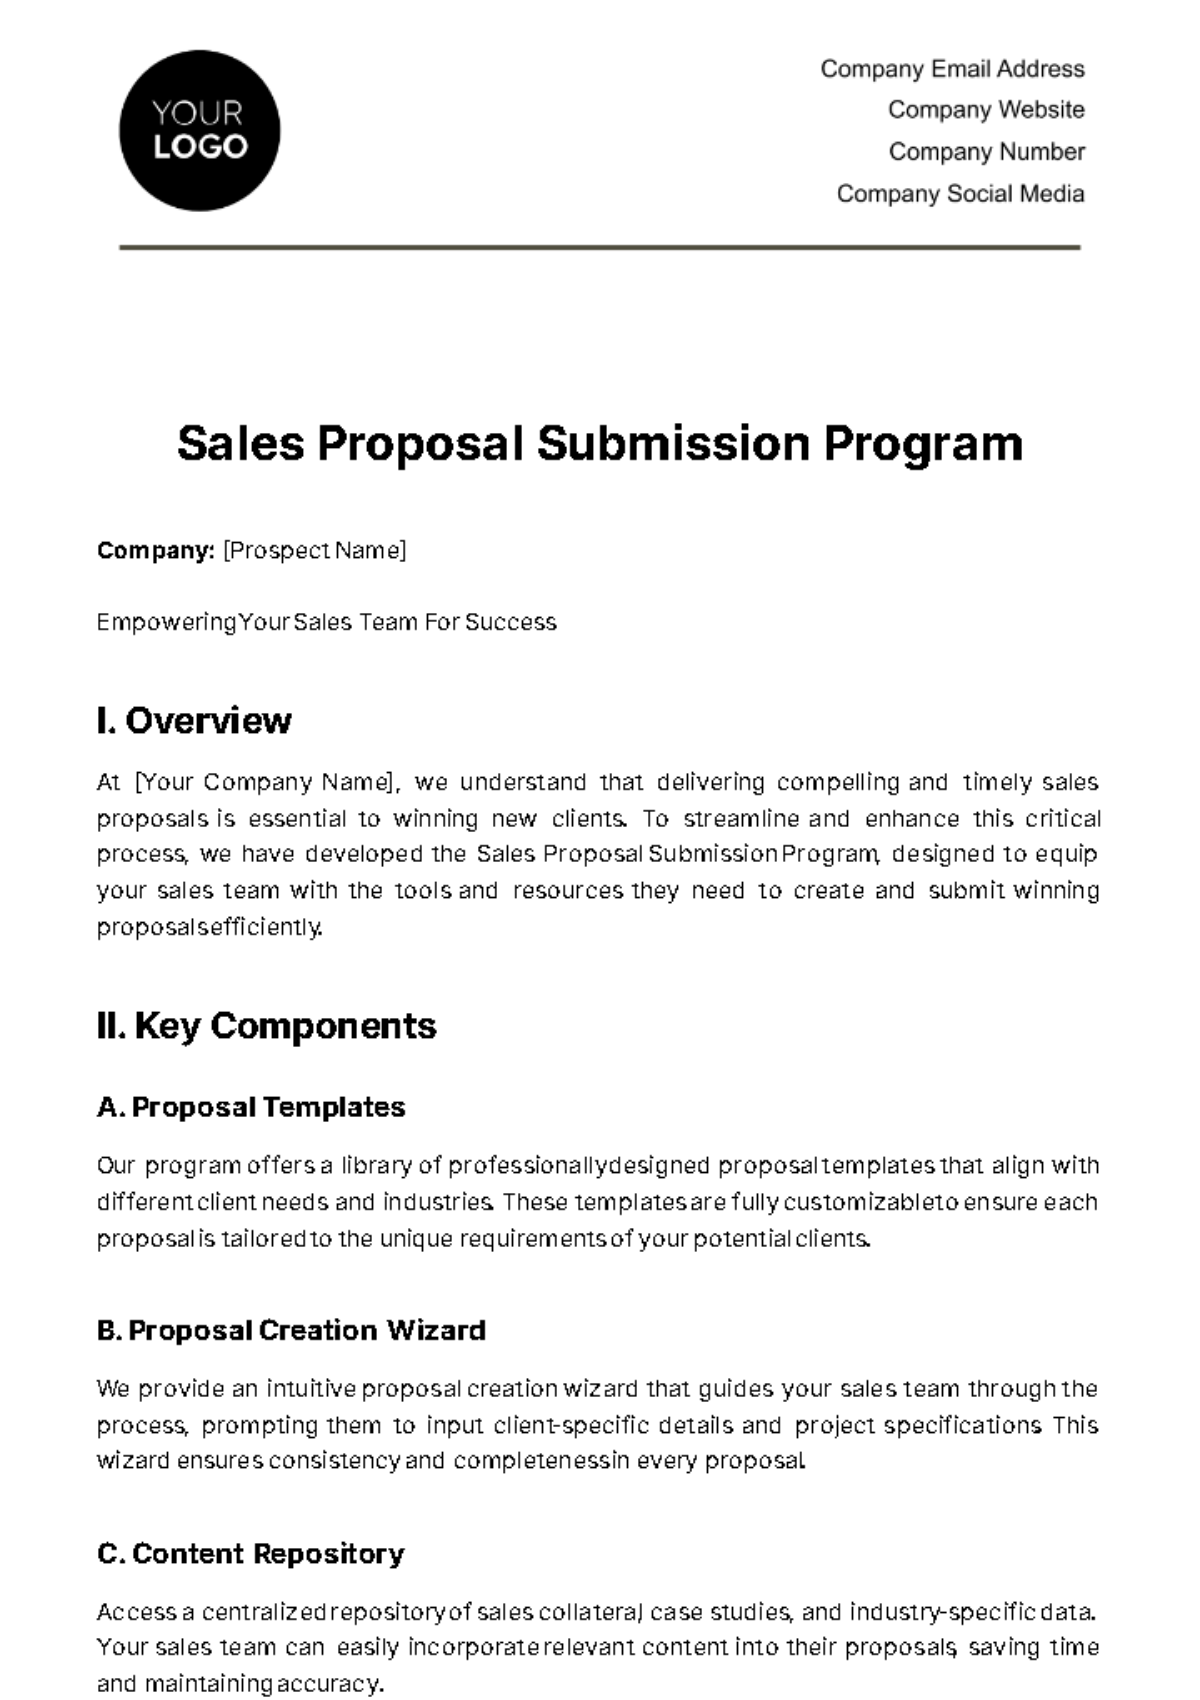 Sales Proposal Submission Program Template